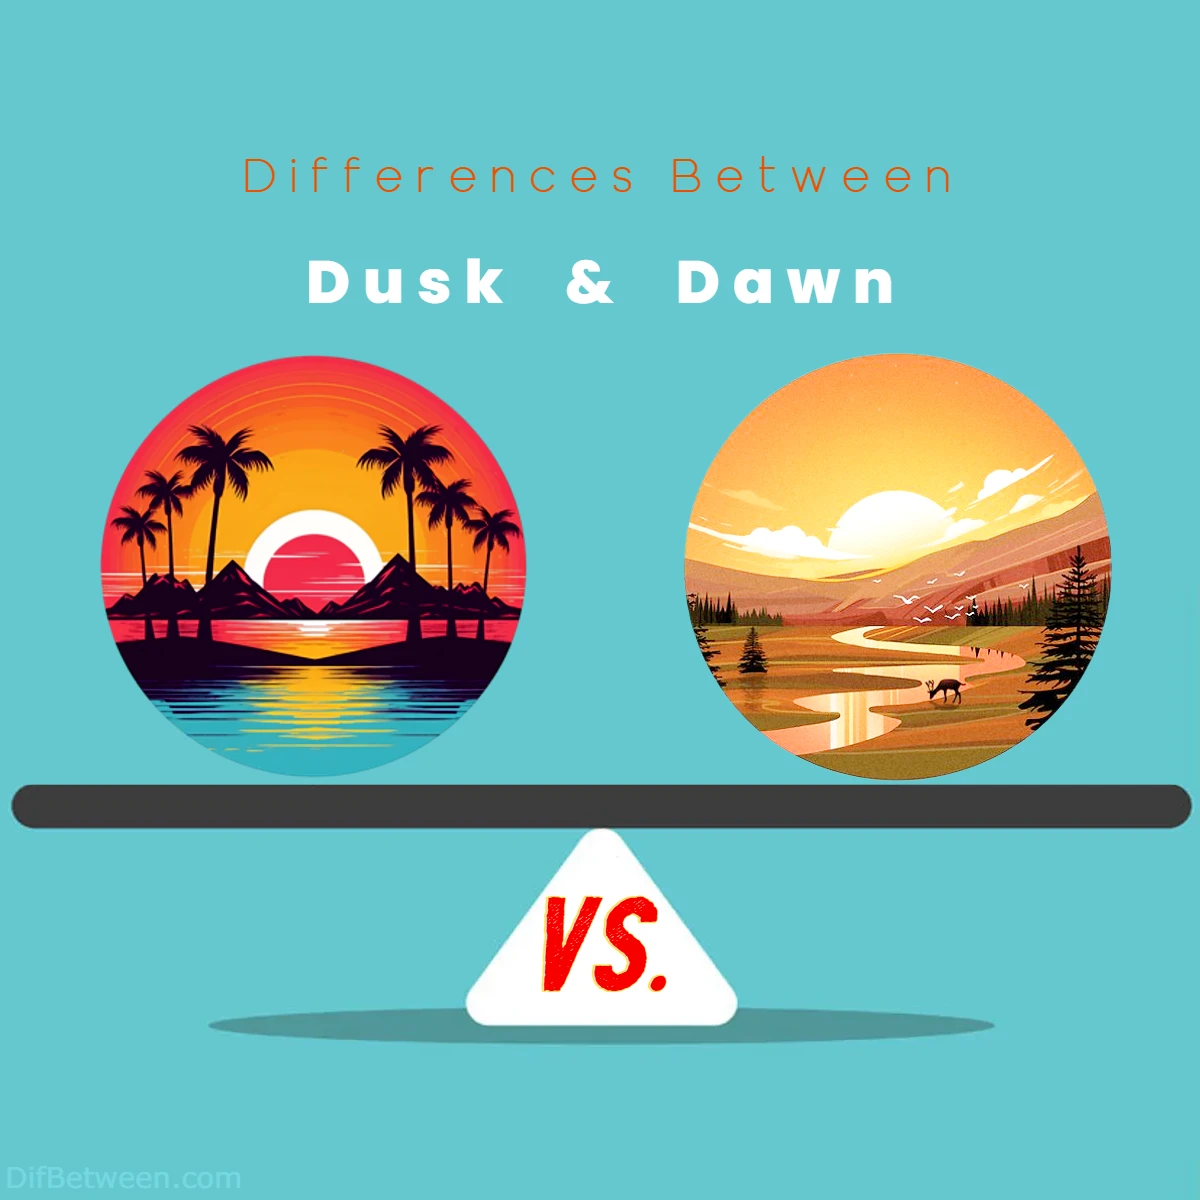 Differences Between Dusk vs Dawn